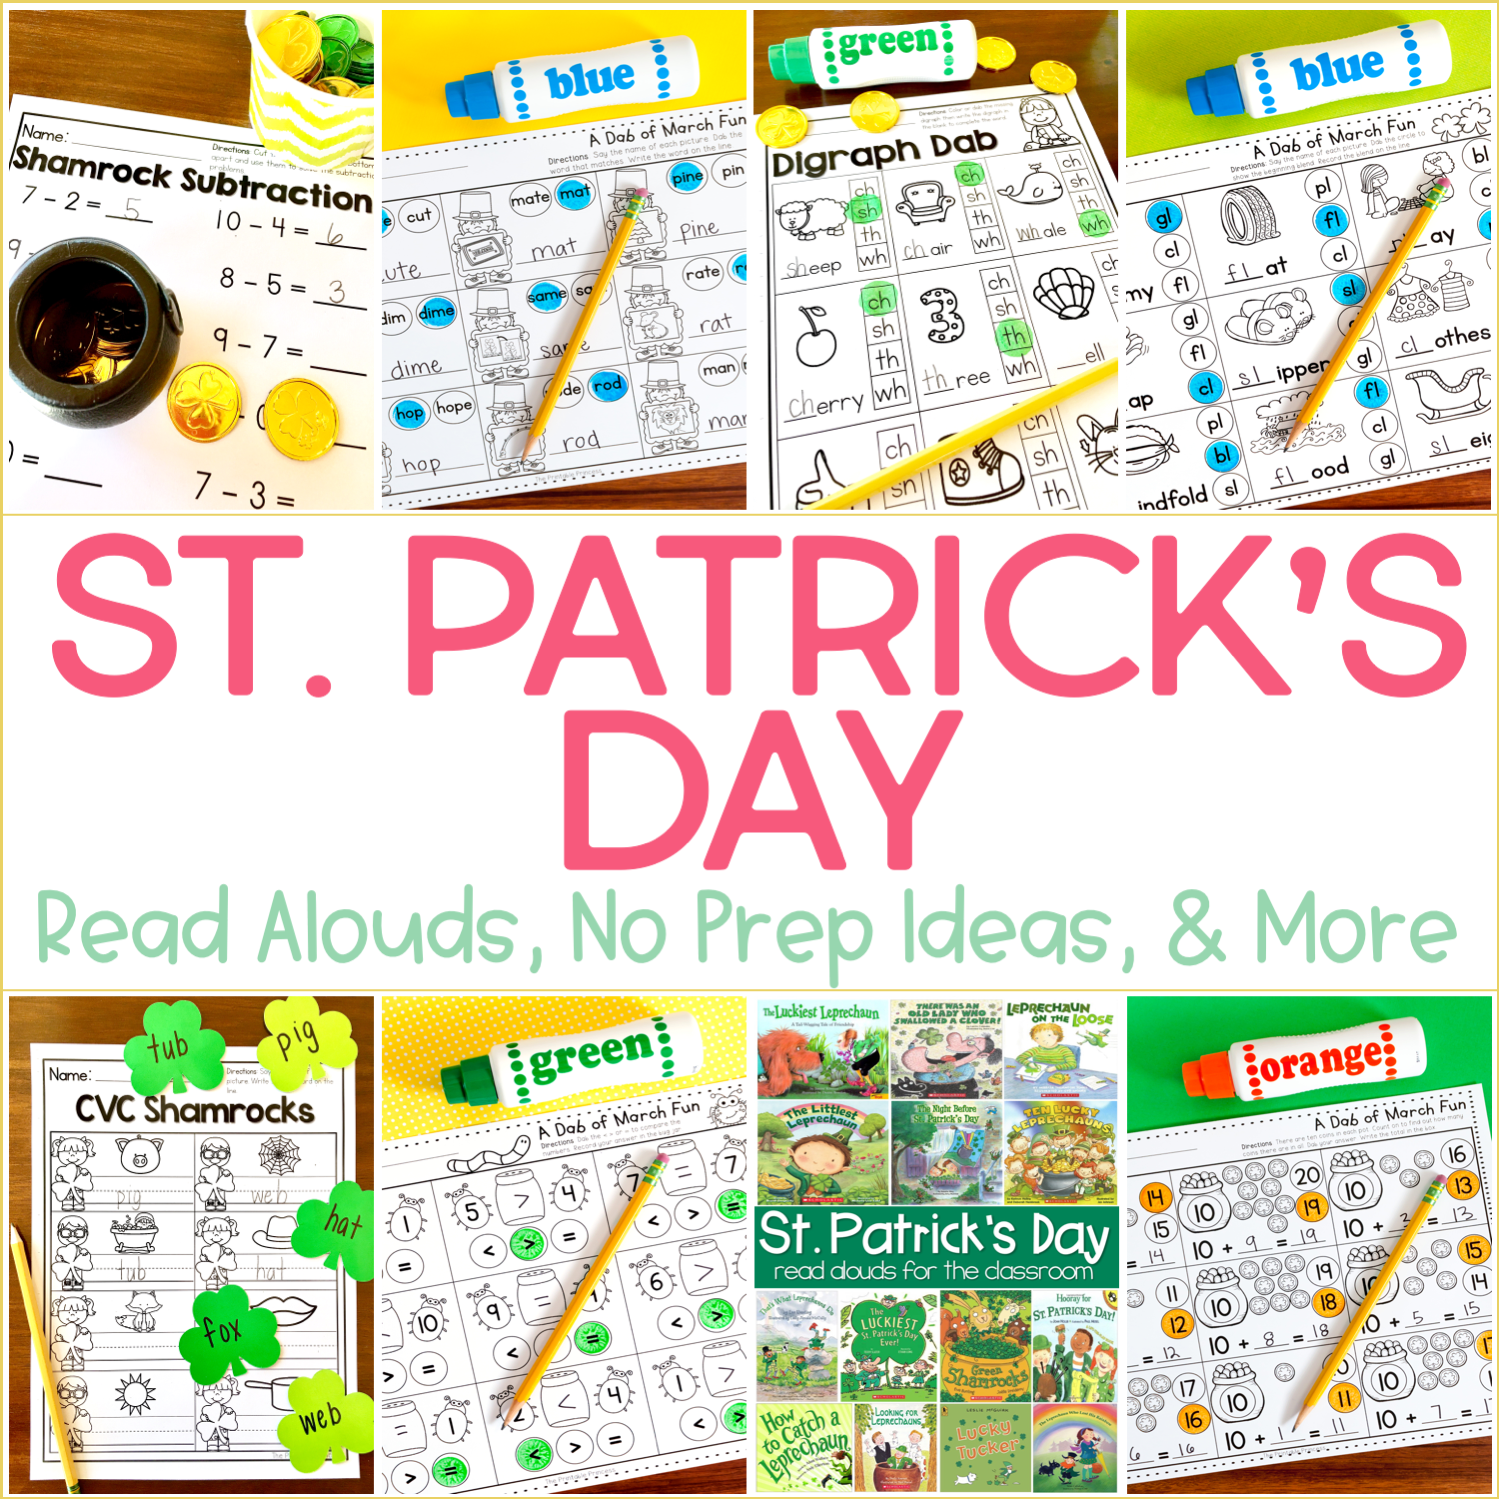 Read Alouds, No Prep Activities, and Freebies for March